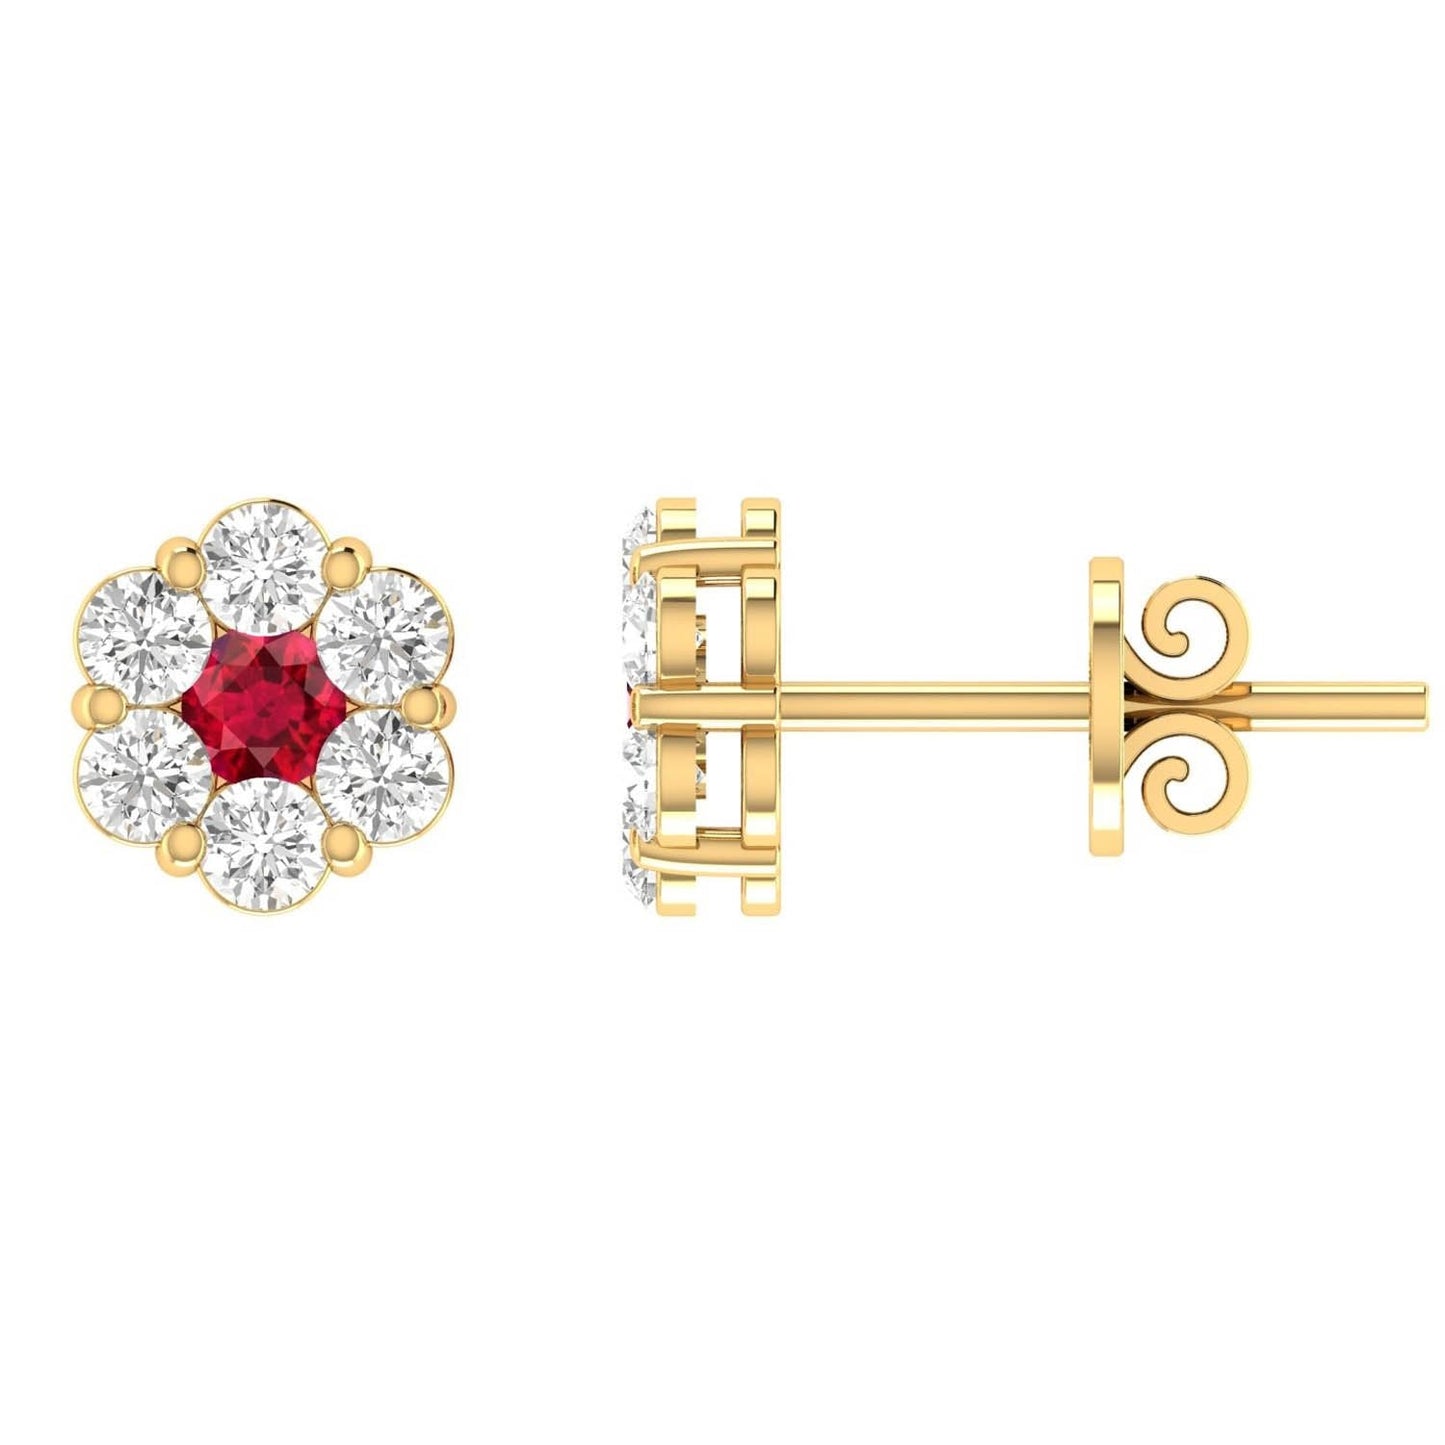 Ruby Diamond Earrings with 0.53ct Diamonds in 9K Yellow Gold - 9YRE75GHR